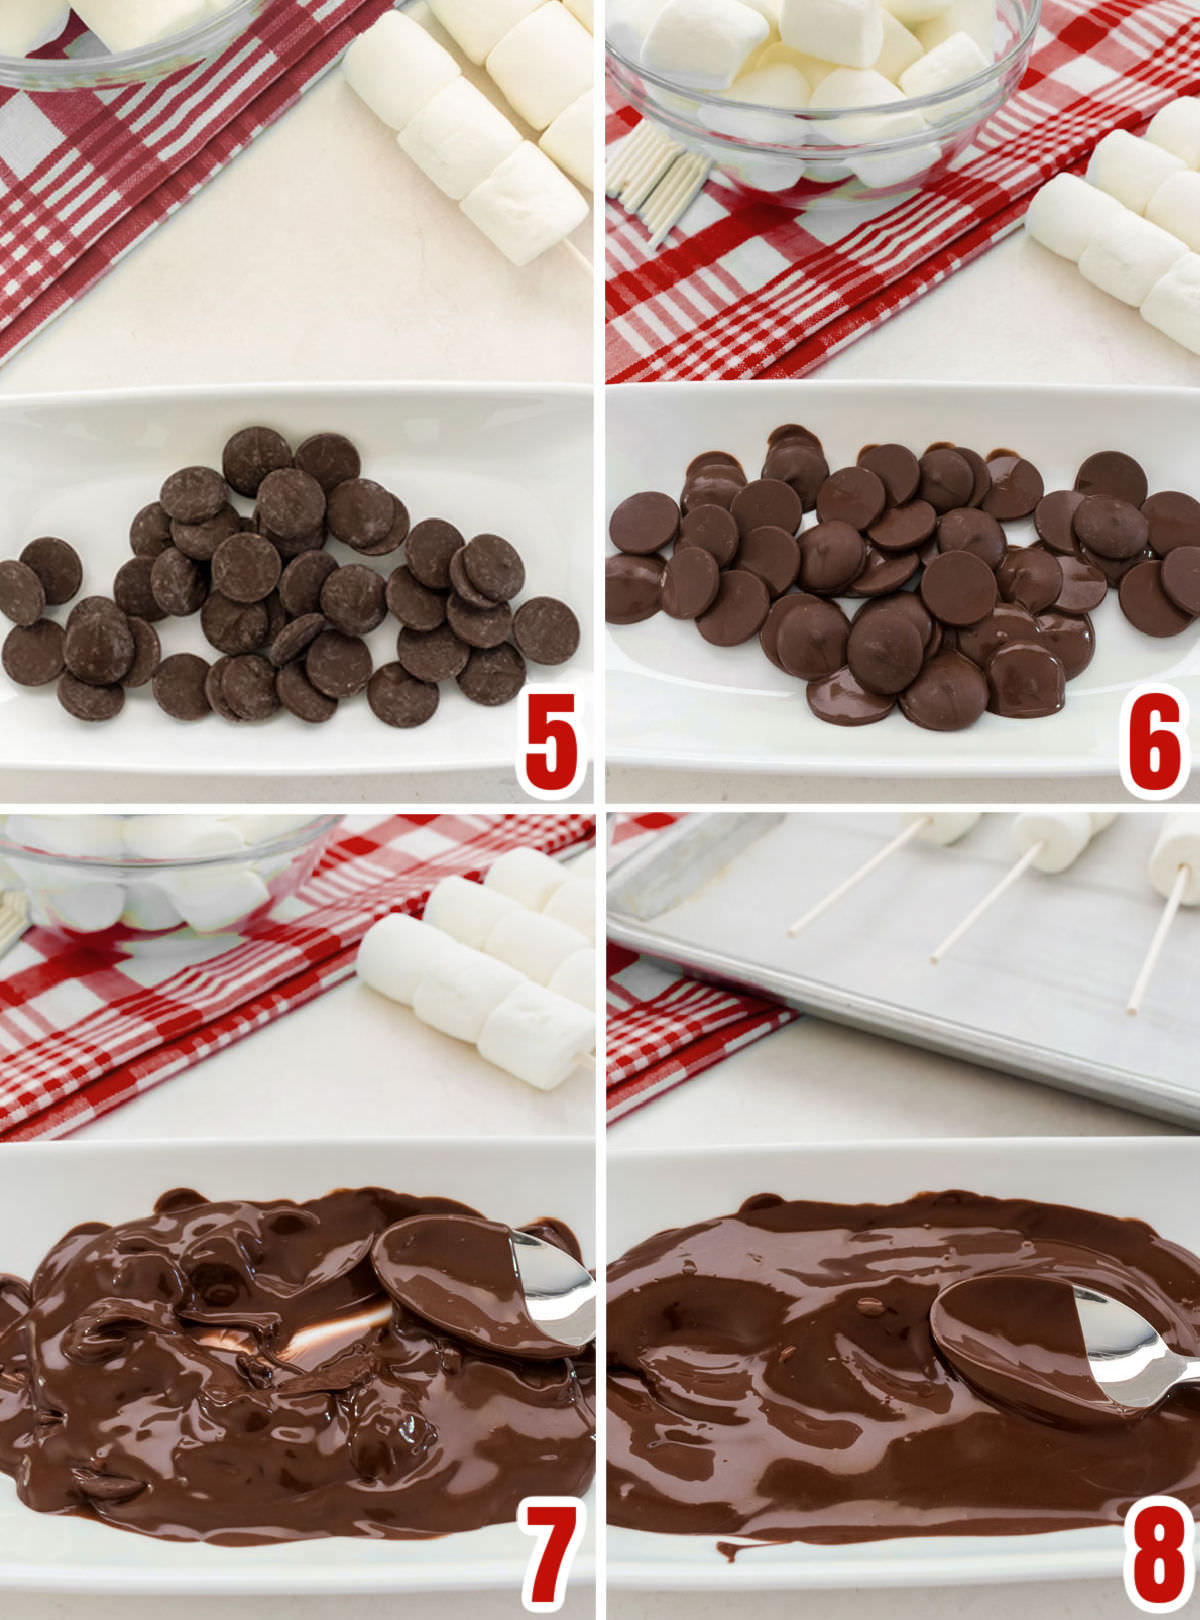 Collage image showing the steps for melting the chocolate for the marshmallow pops.